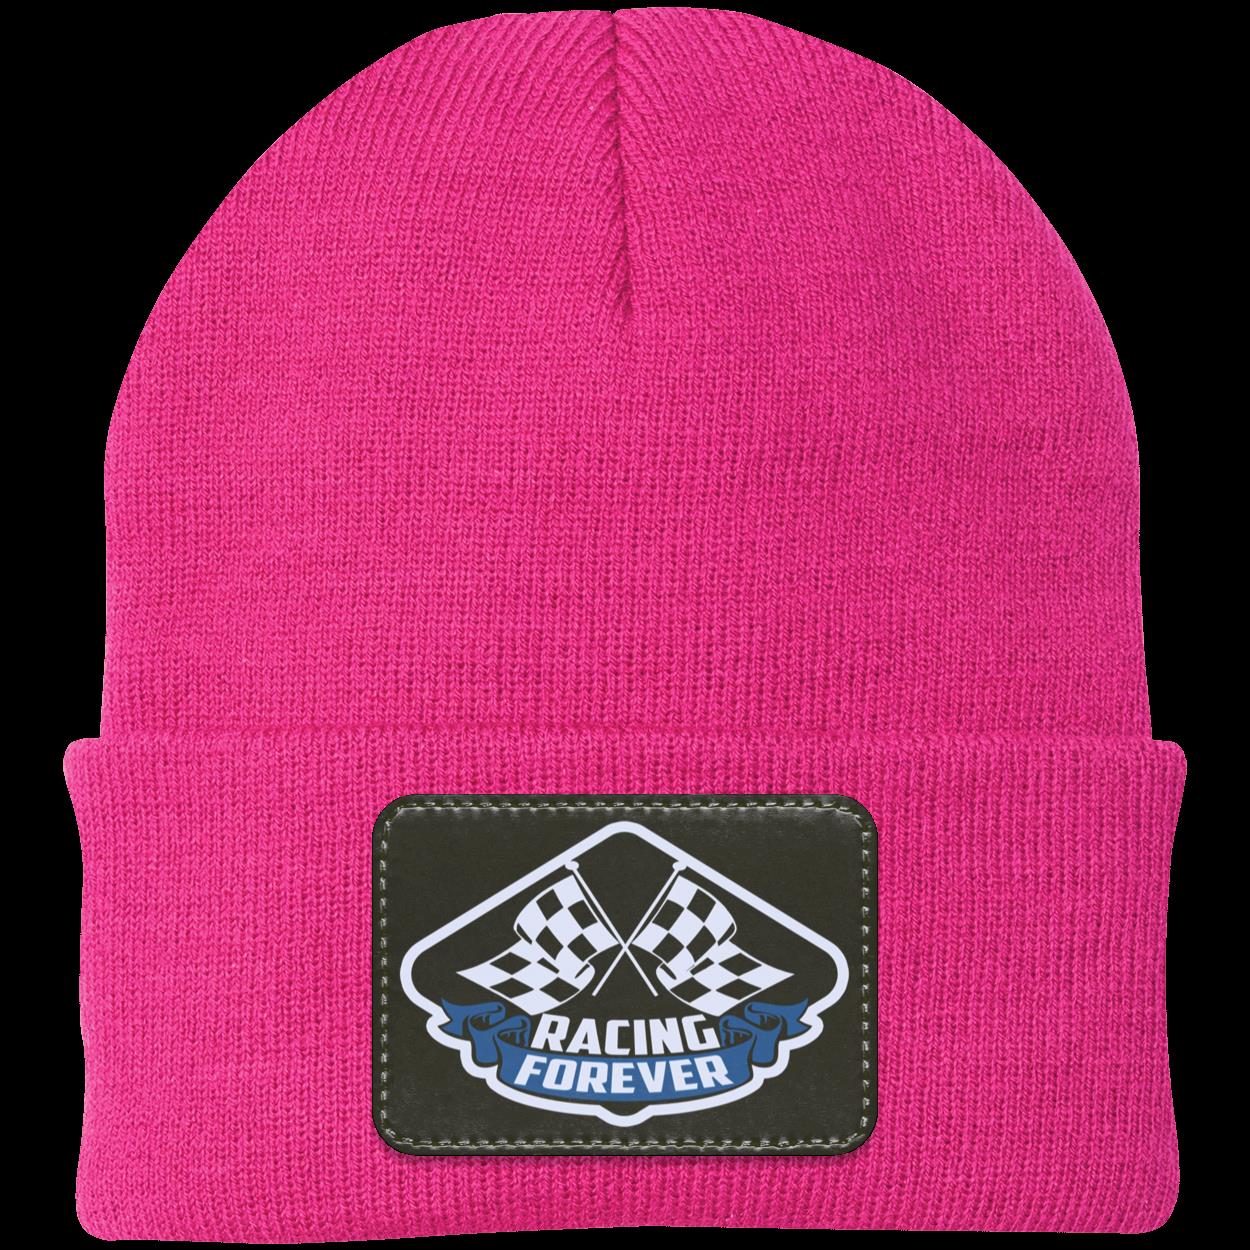 Racing Forever Patched Knit Cap V3